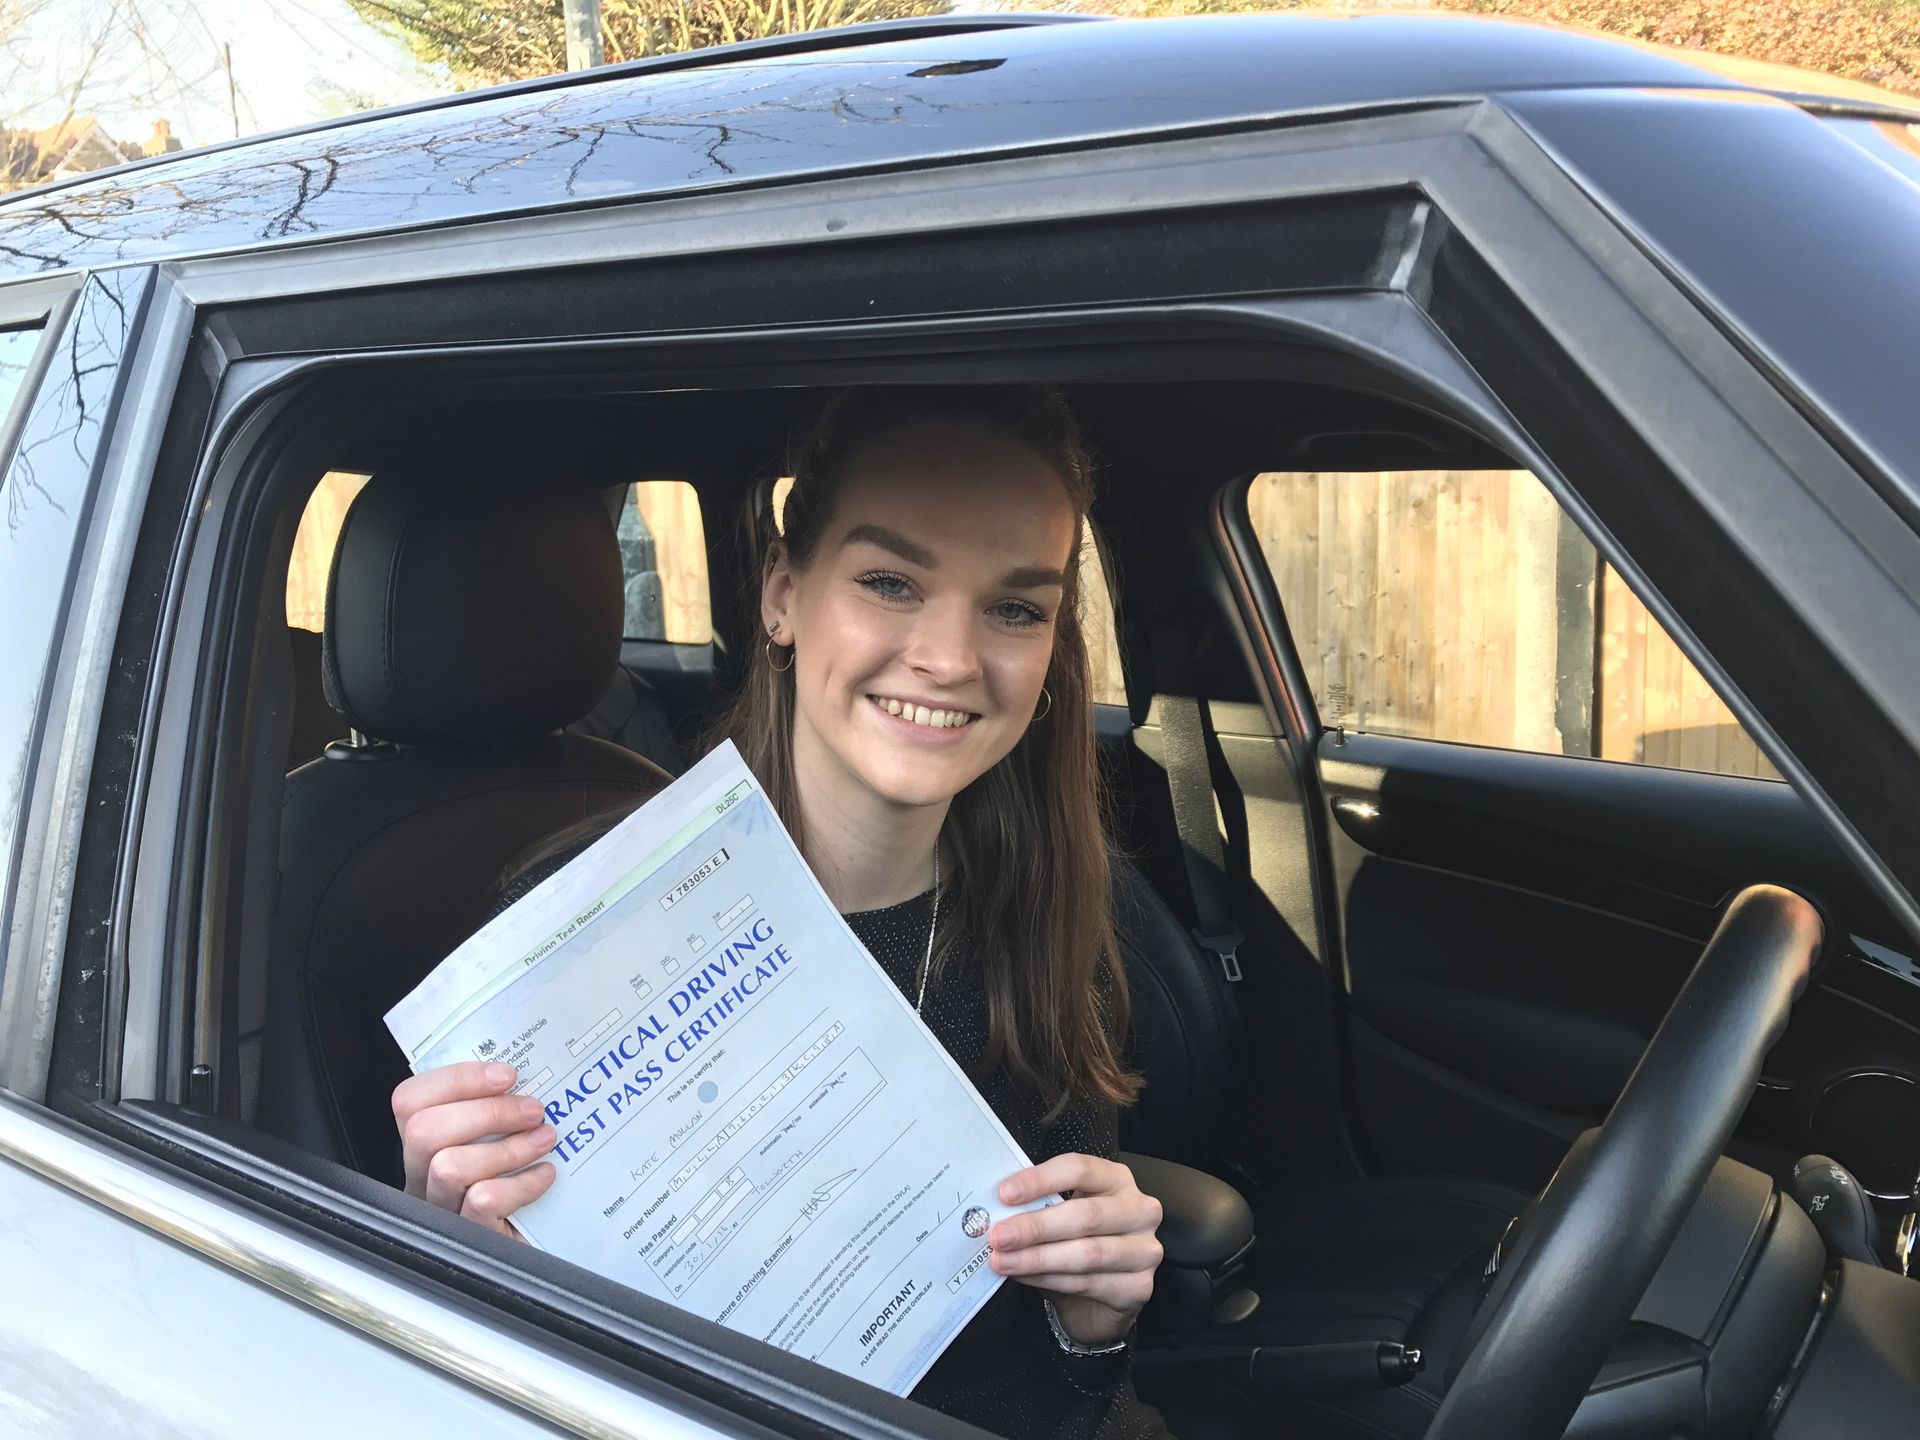 Driver training - Thames Ditton, Surrey - Success With Sara - passed